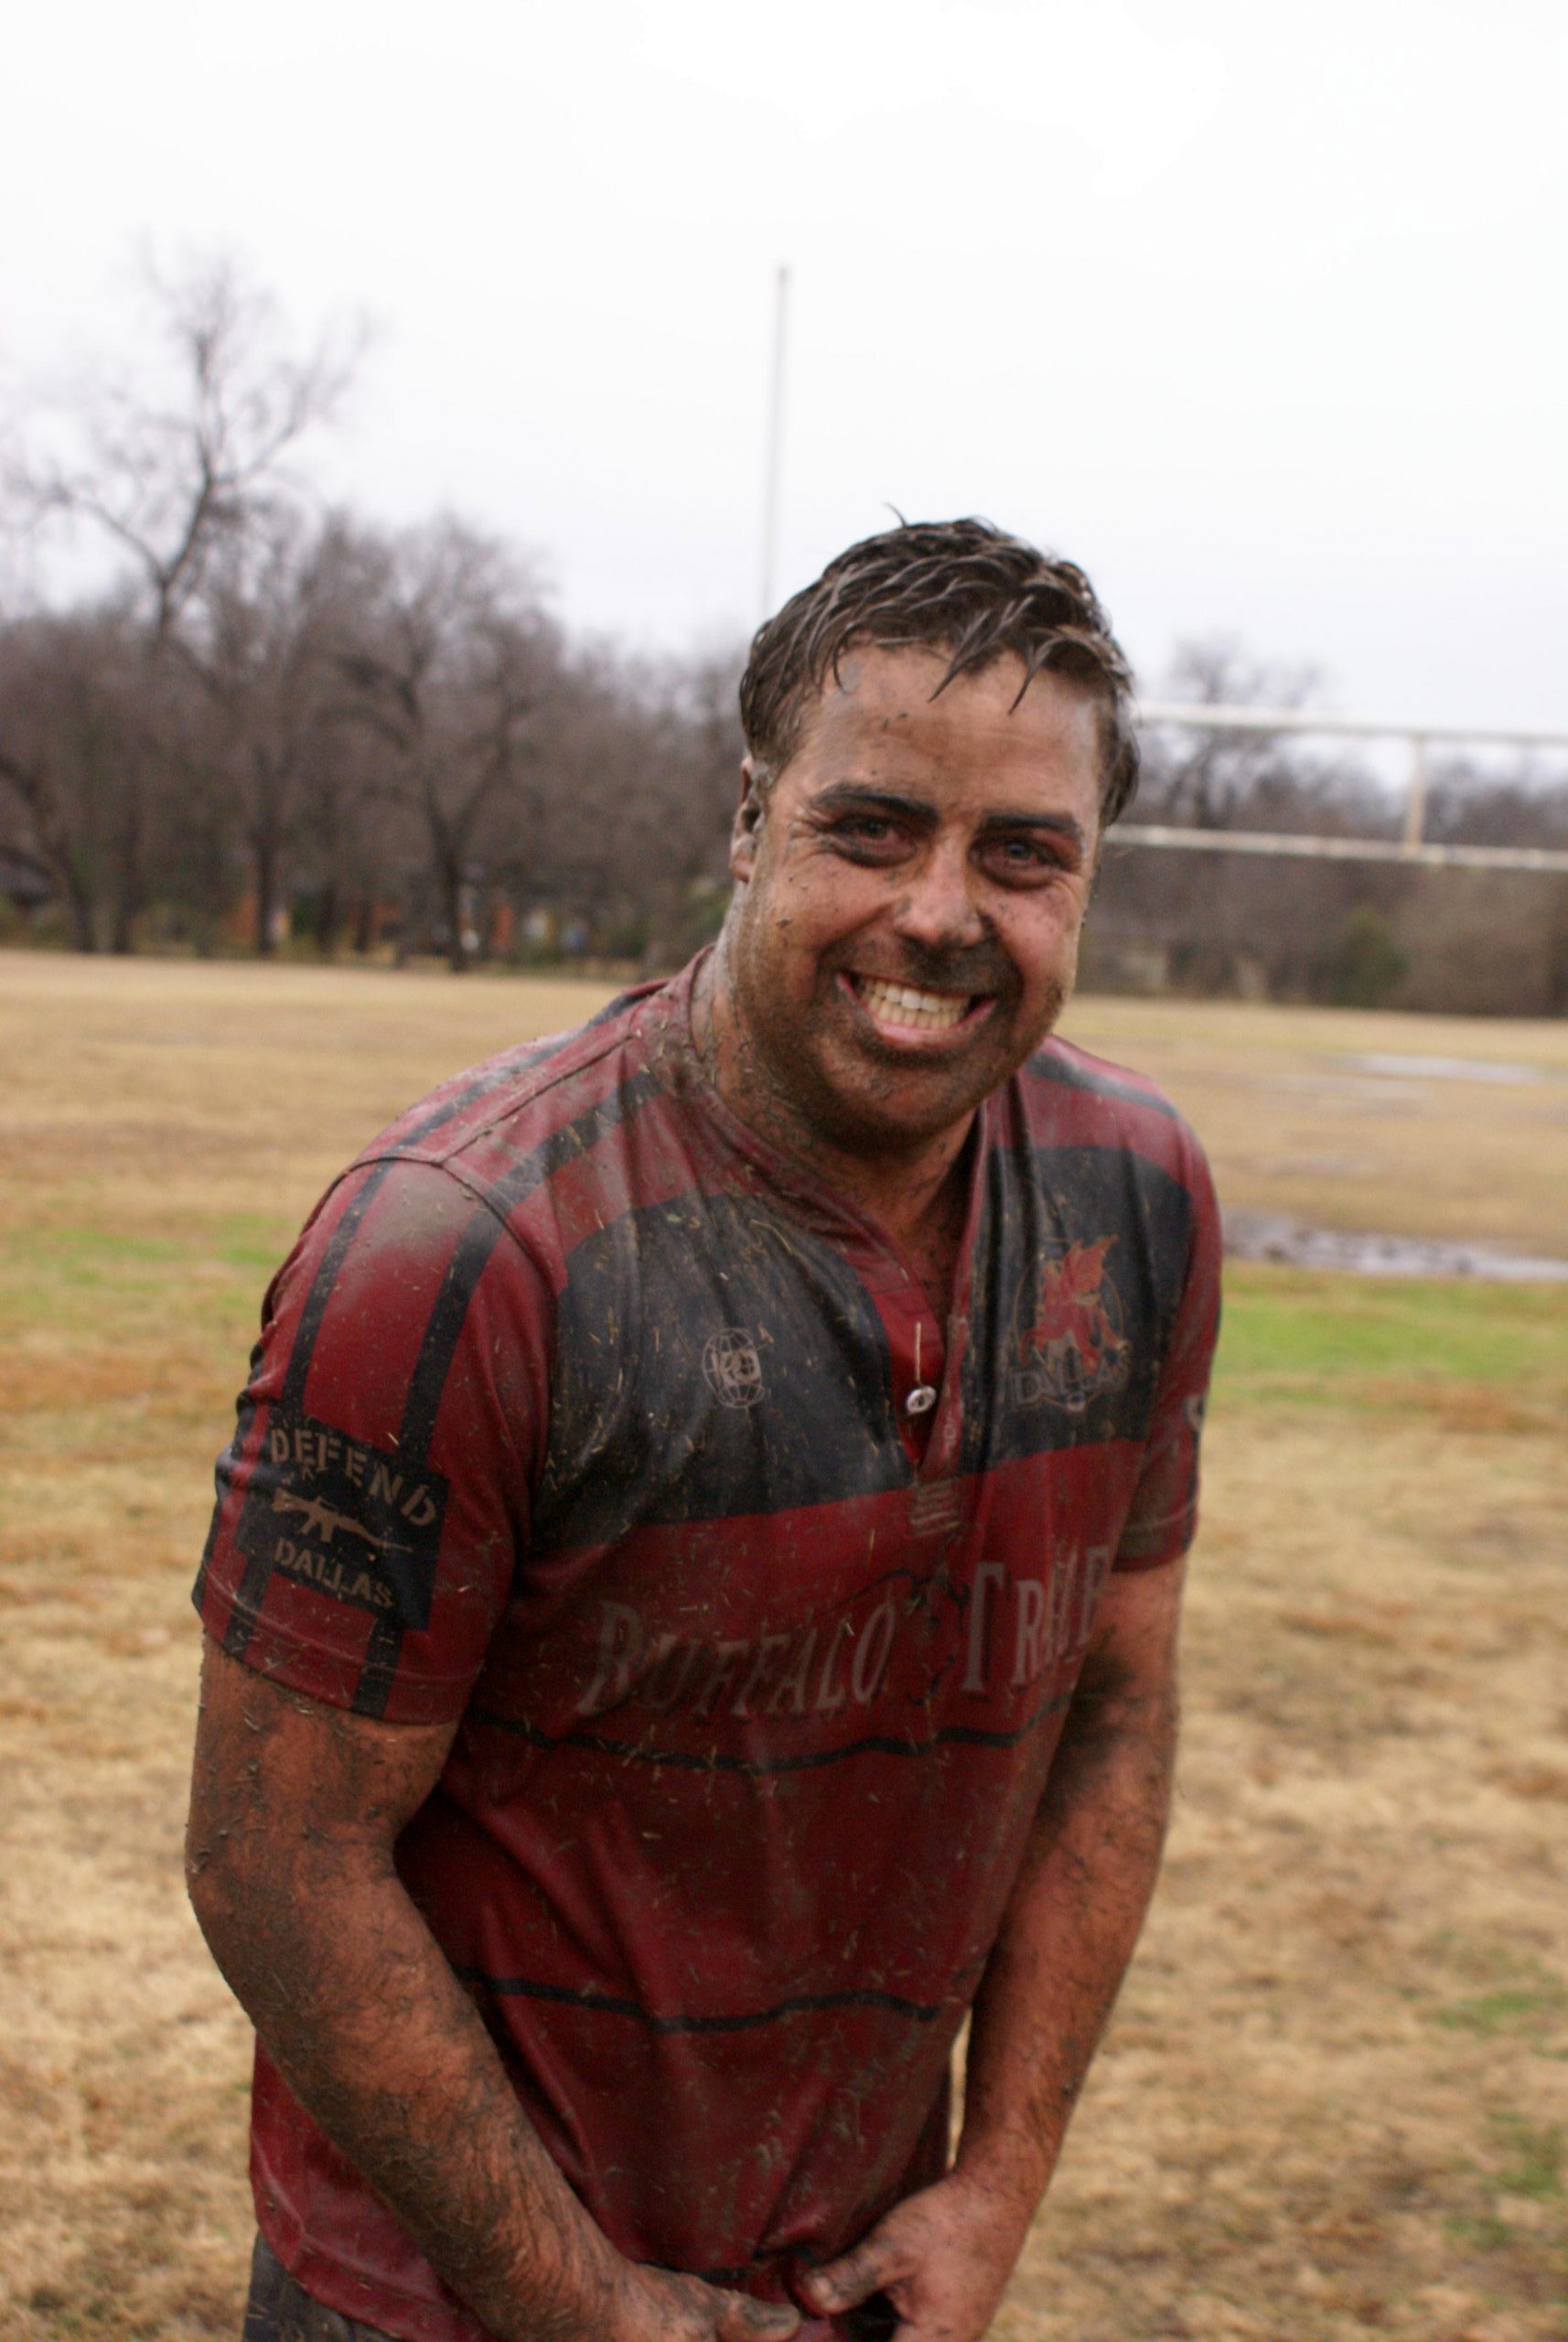 Jeremy Nielson smiles after a muddy match.